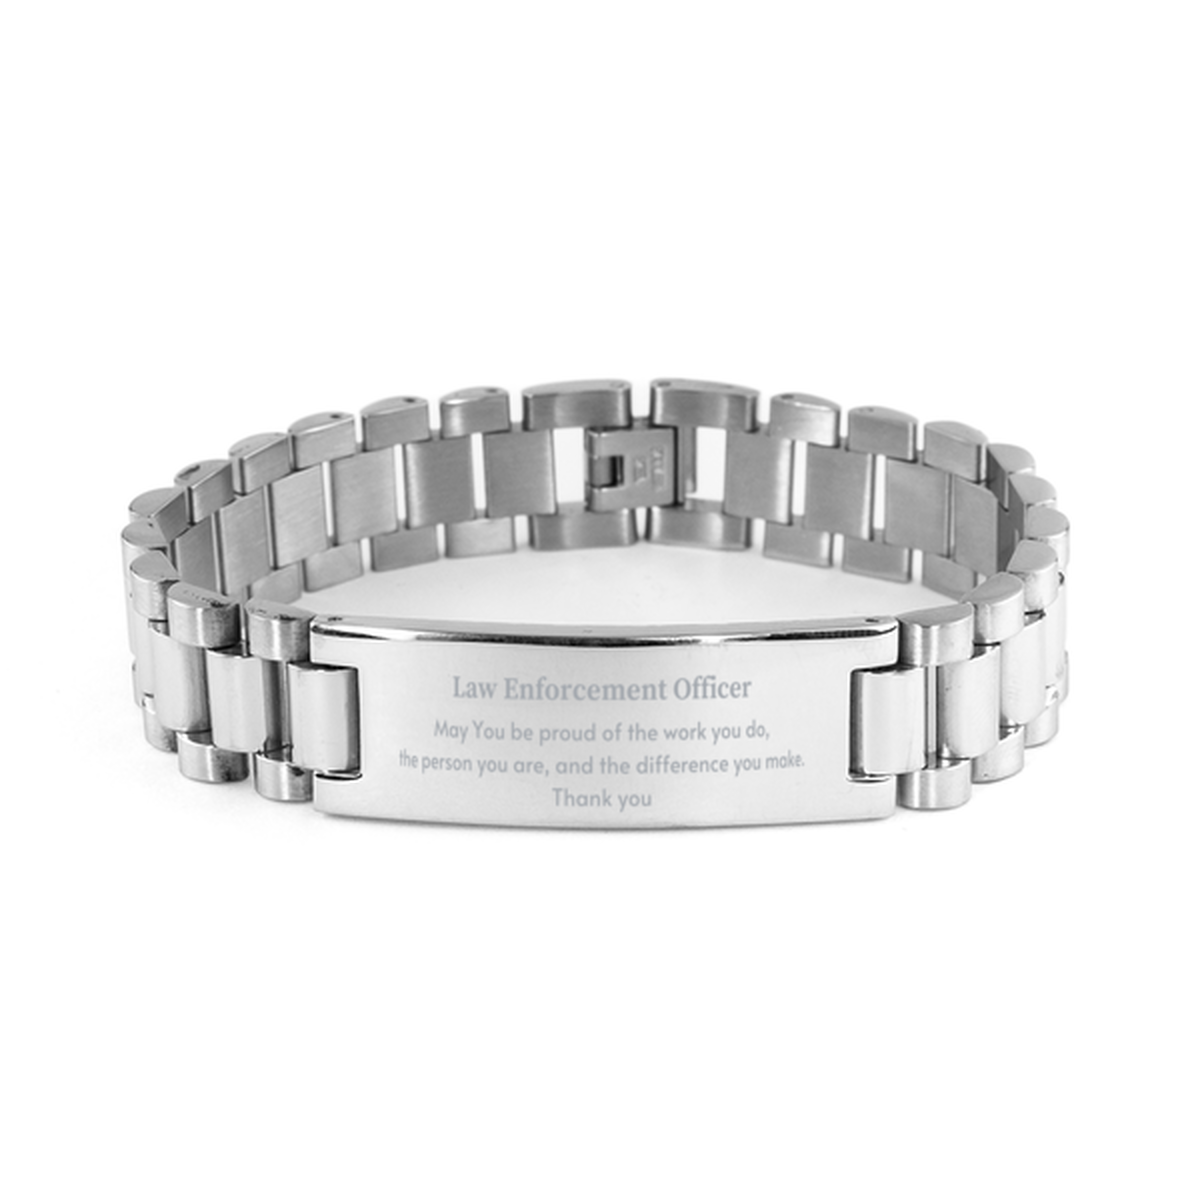 Heartwarming Ladder Stainless Steel Bracelet Retirement Coworkers Gifts for Law Enforcement Officer, Law Enforcement Officer May You be proud of the work you do, the person you are Gifts for Boss Men Women Friends